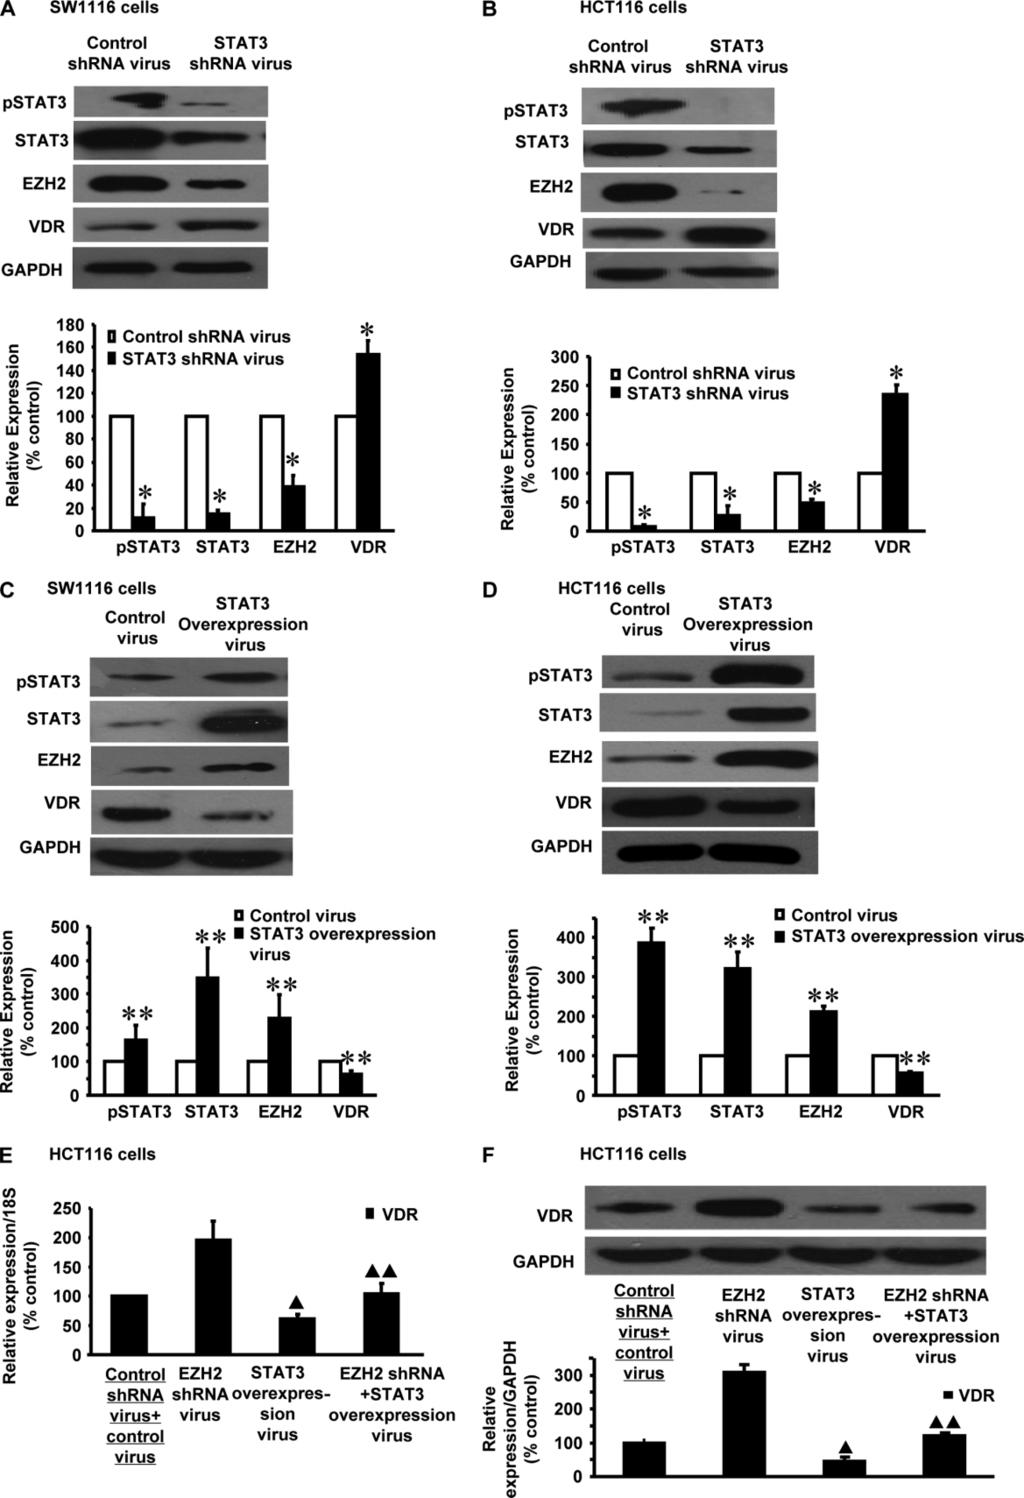 STAT3 up-regulates EZH2 which may deregulate VDR 285 Figure 5. Effect of STAT3 on EZH2 and VDR expression in CRC cells.